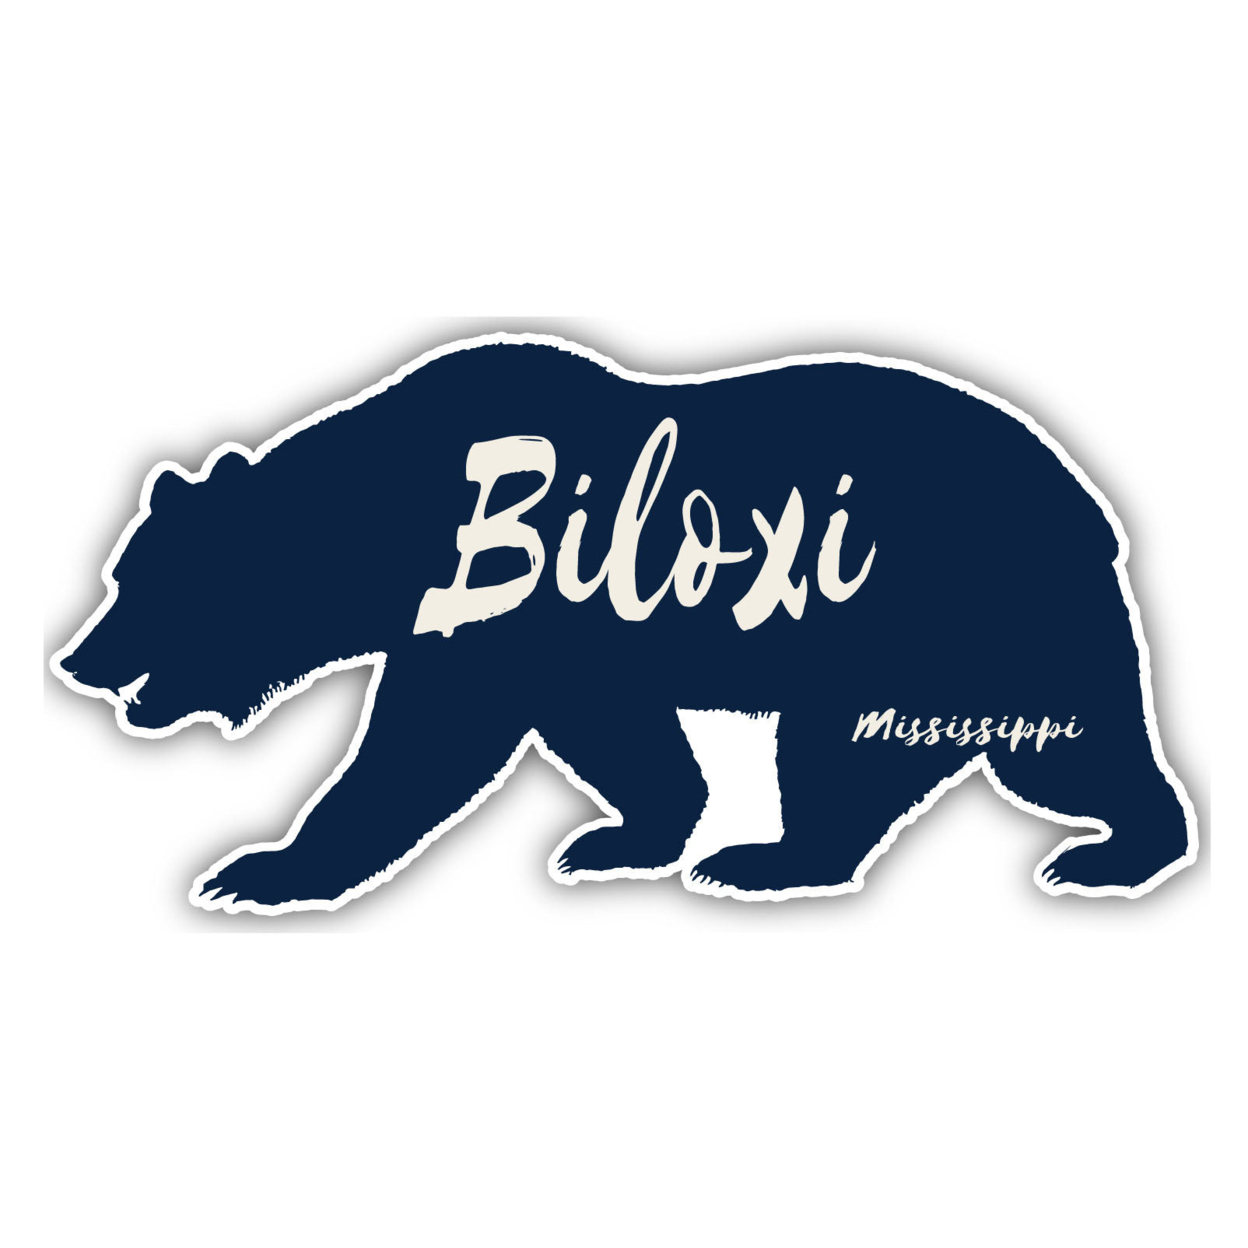 Biloxi Mississippi Souvenir Decorative Stickers (Choose Theme And Size) - 4-Pack, 6-Inch, Tent